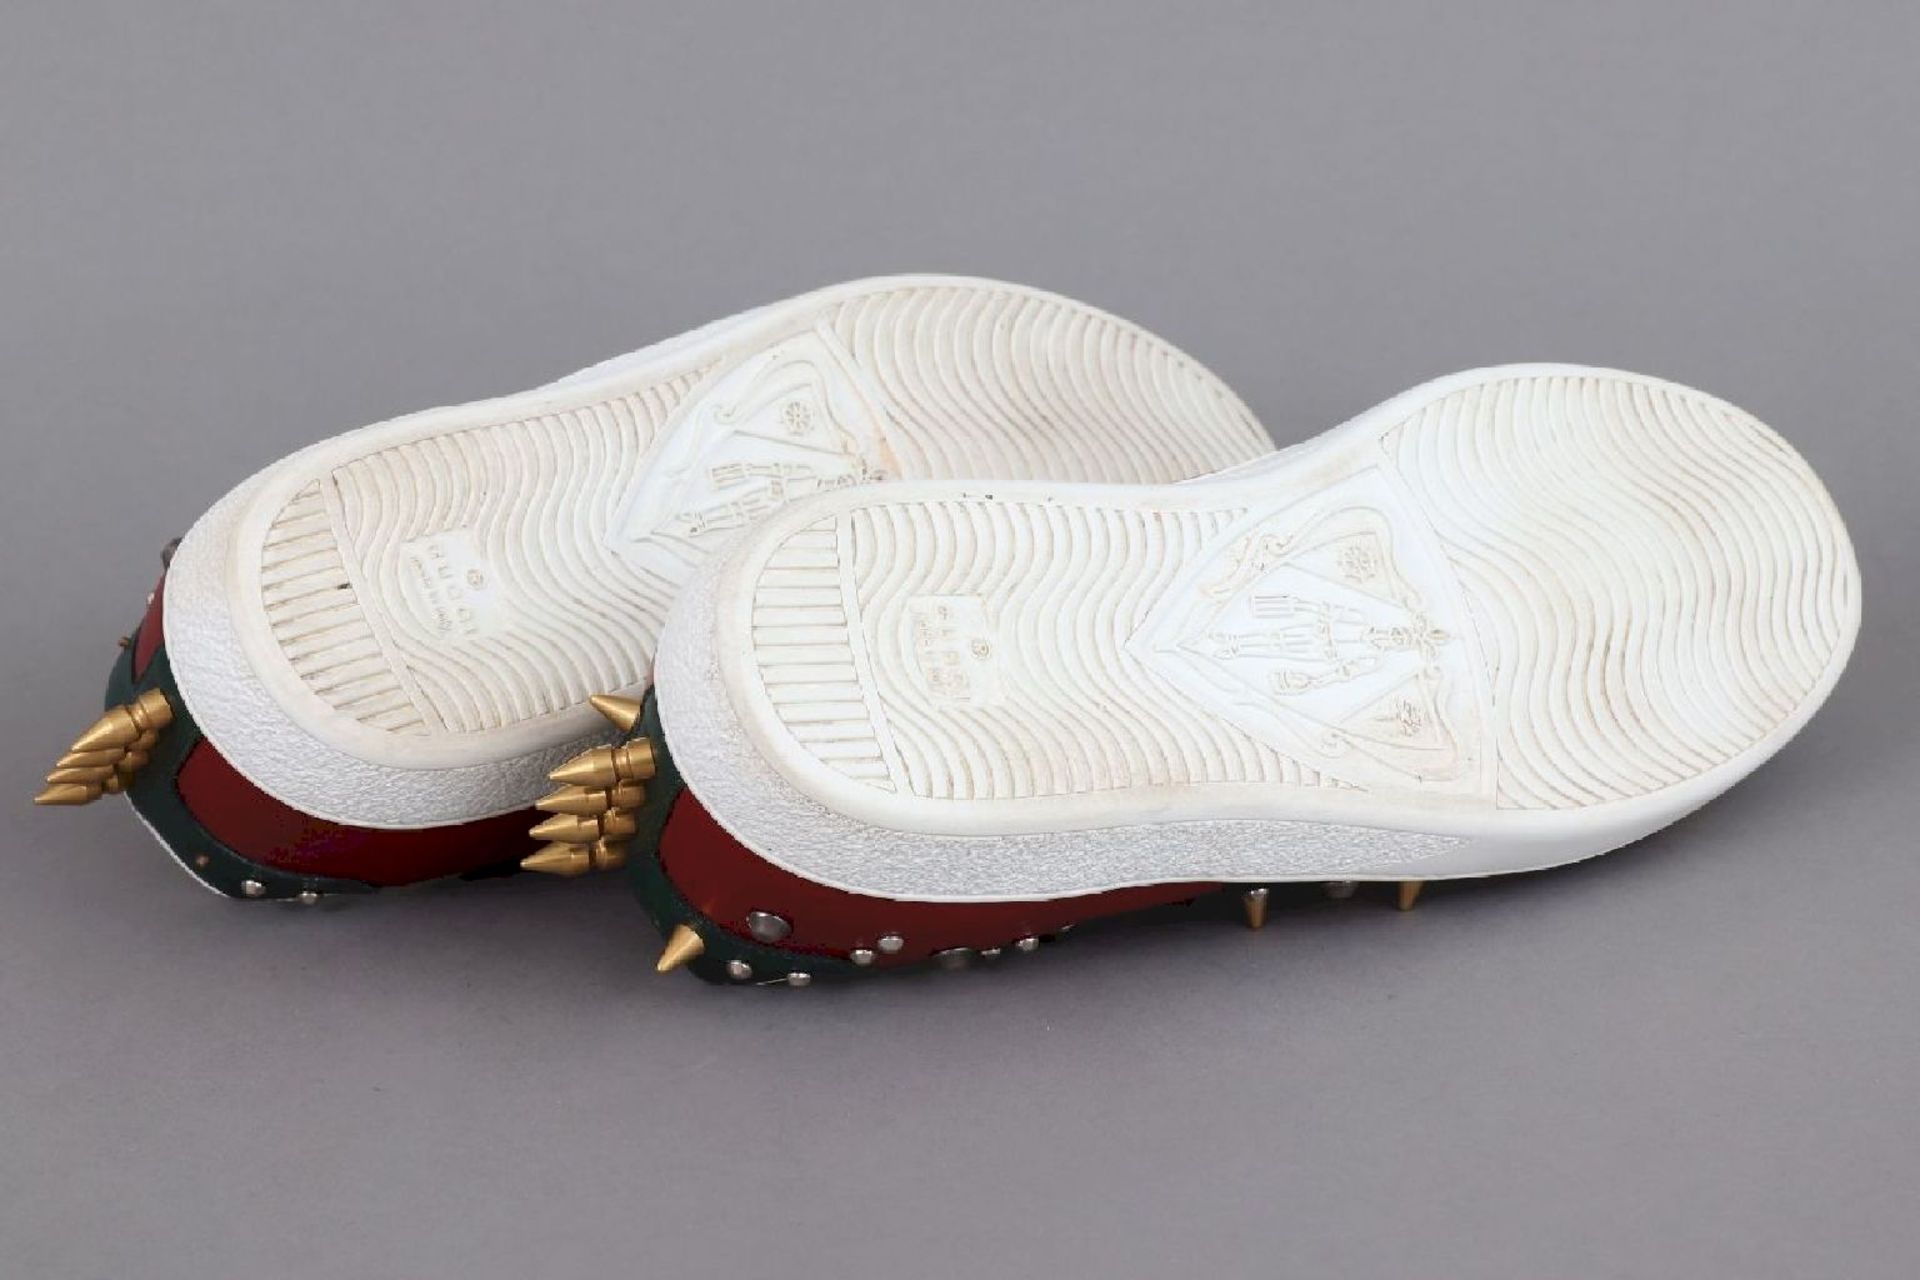 GUCCI Sneaker ACE studded - Image 7 of 8